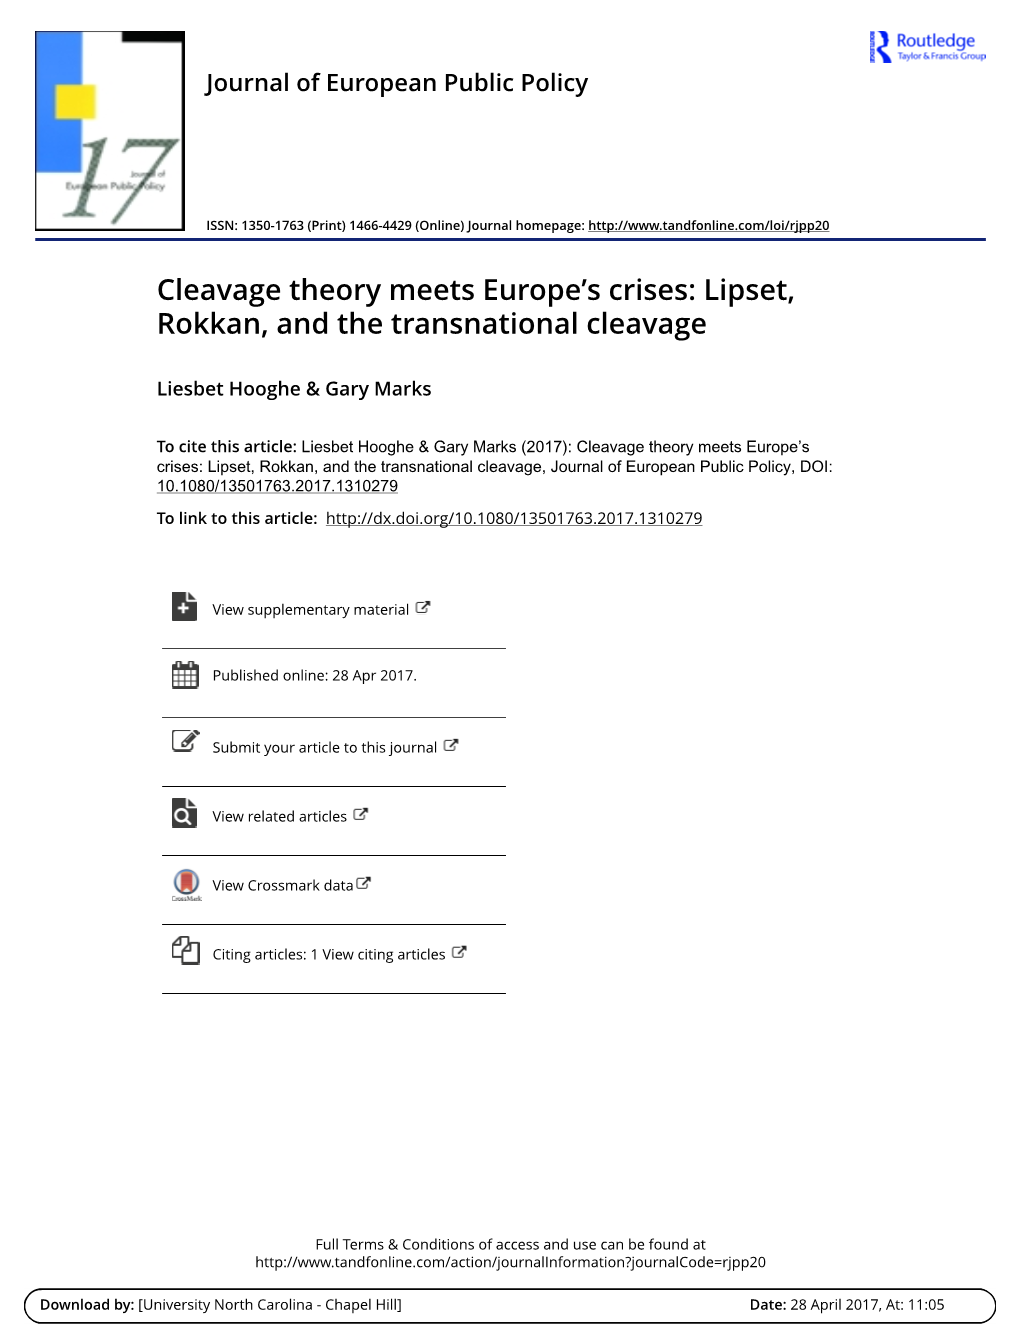 Lipset, Rokkan, and the Transnational Cleavage